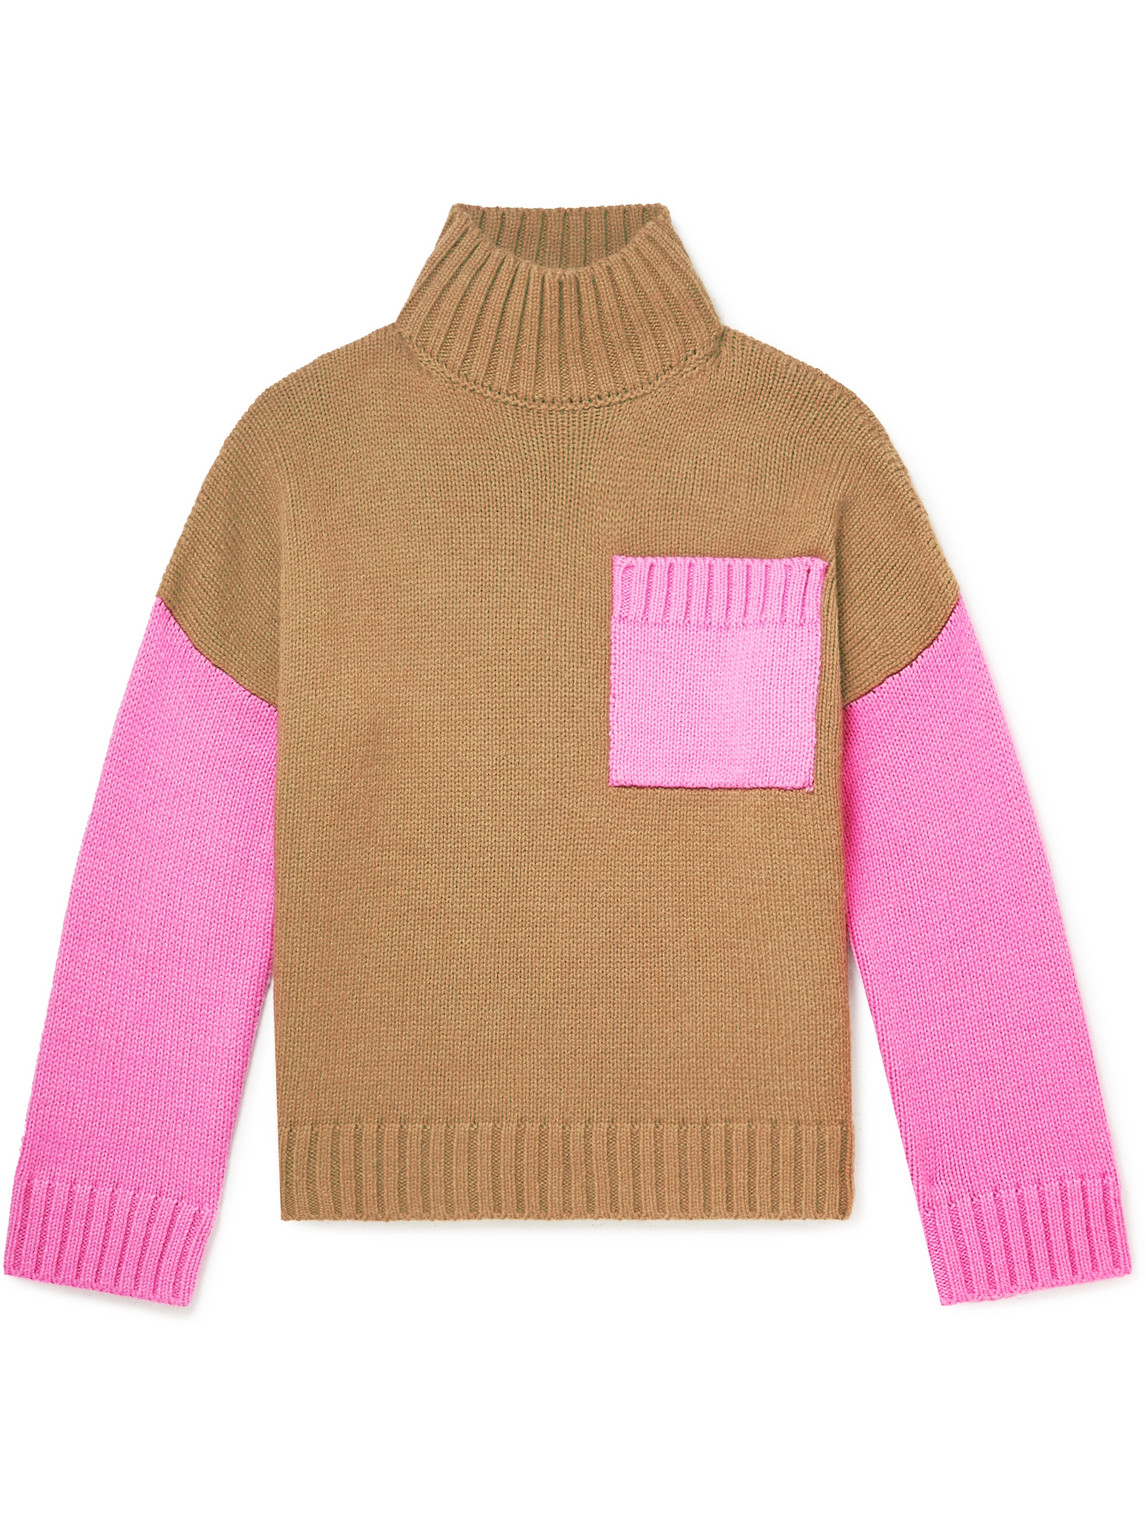 JW ANDERSON OVERSIZED LOGO-EMBROIDERED TWO-TONE KNITTED ROLLNECK SWEATER